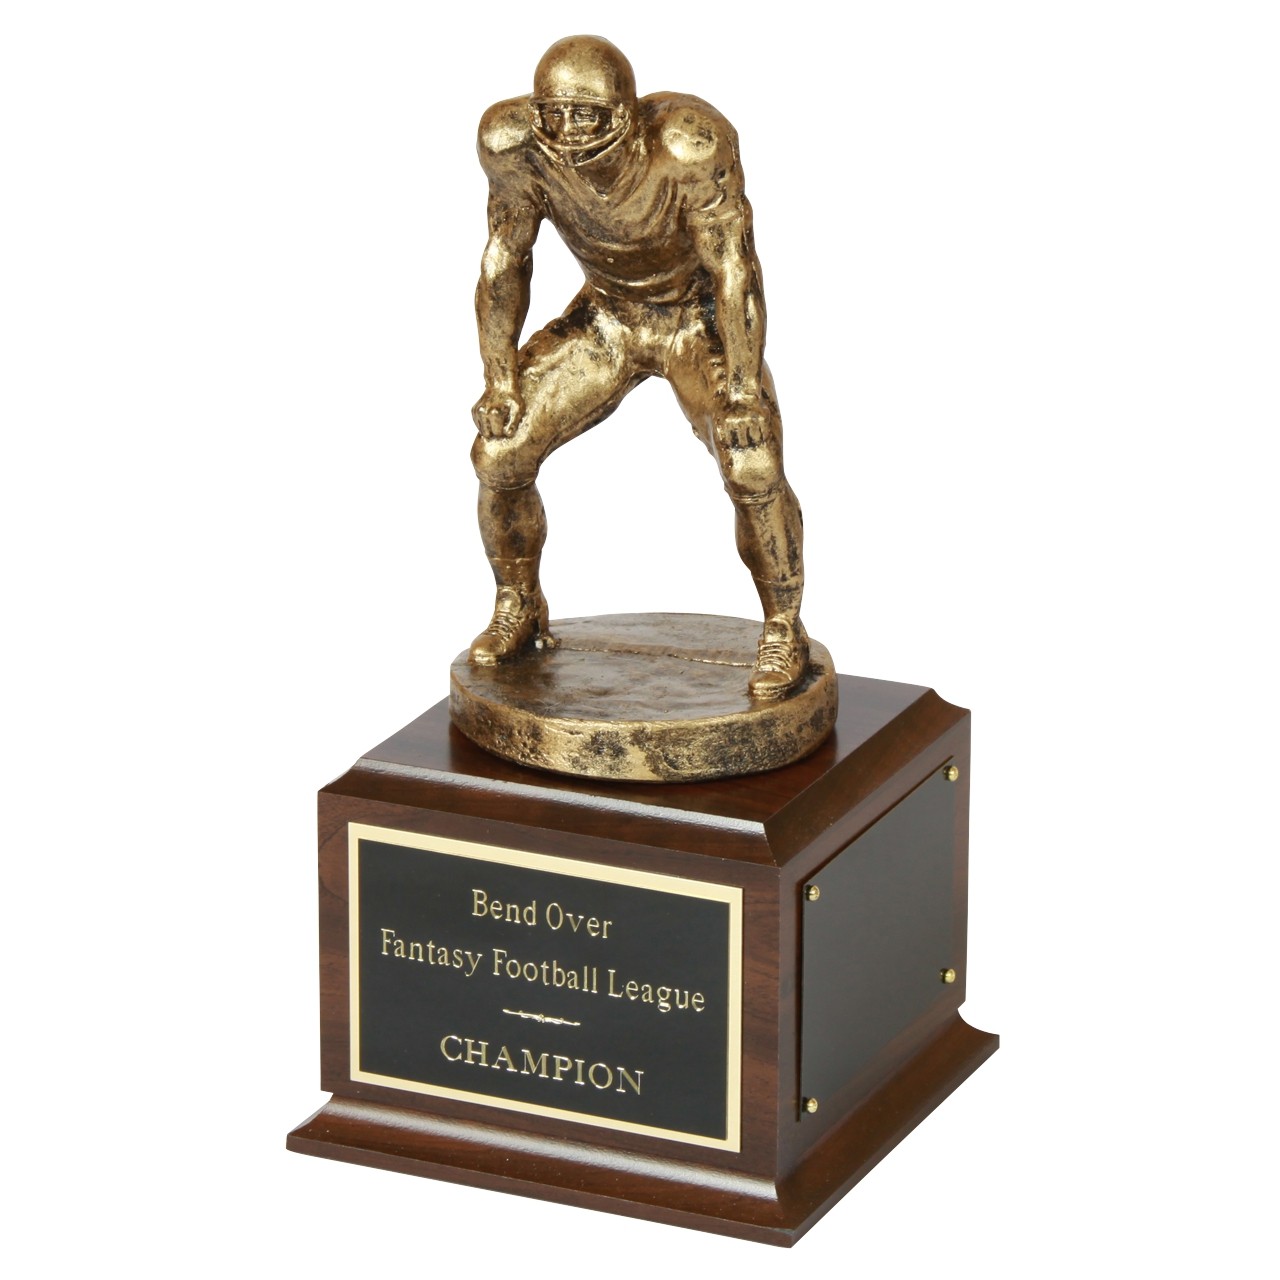 FREE ENGRAVING MARCH MADNESS BASKETBALL STAND UP PERPETUAL PLAQUE TROPHY AWARD 